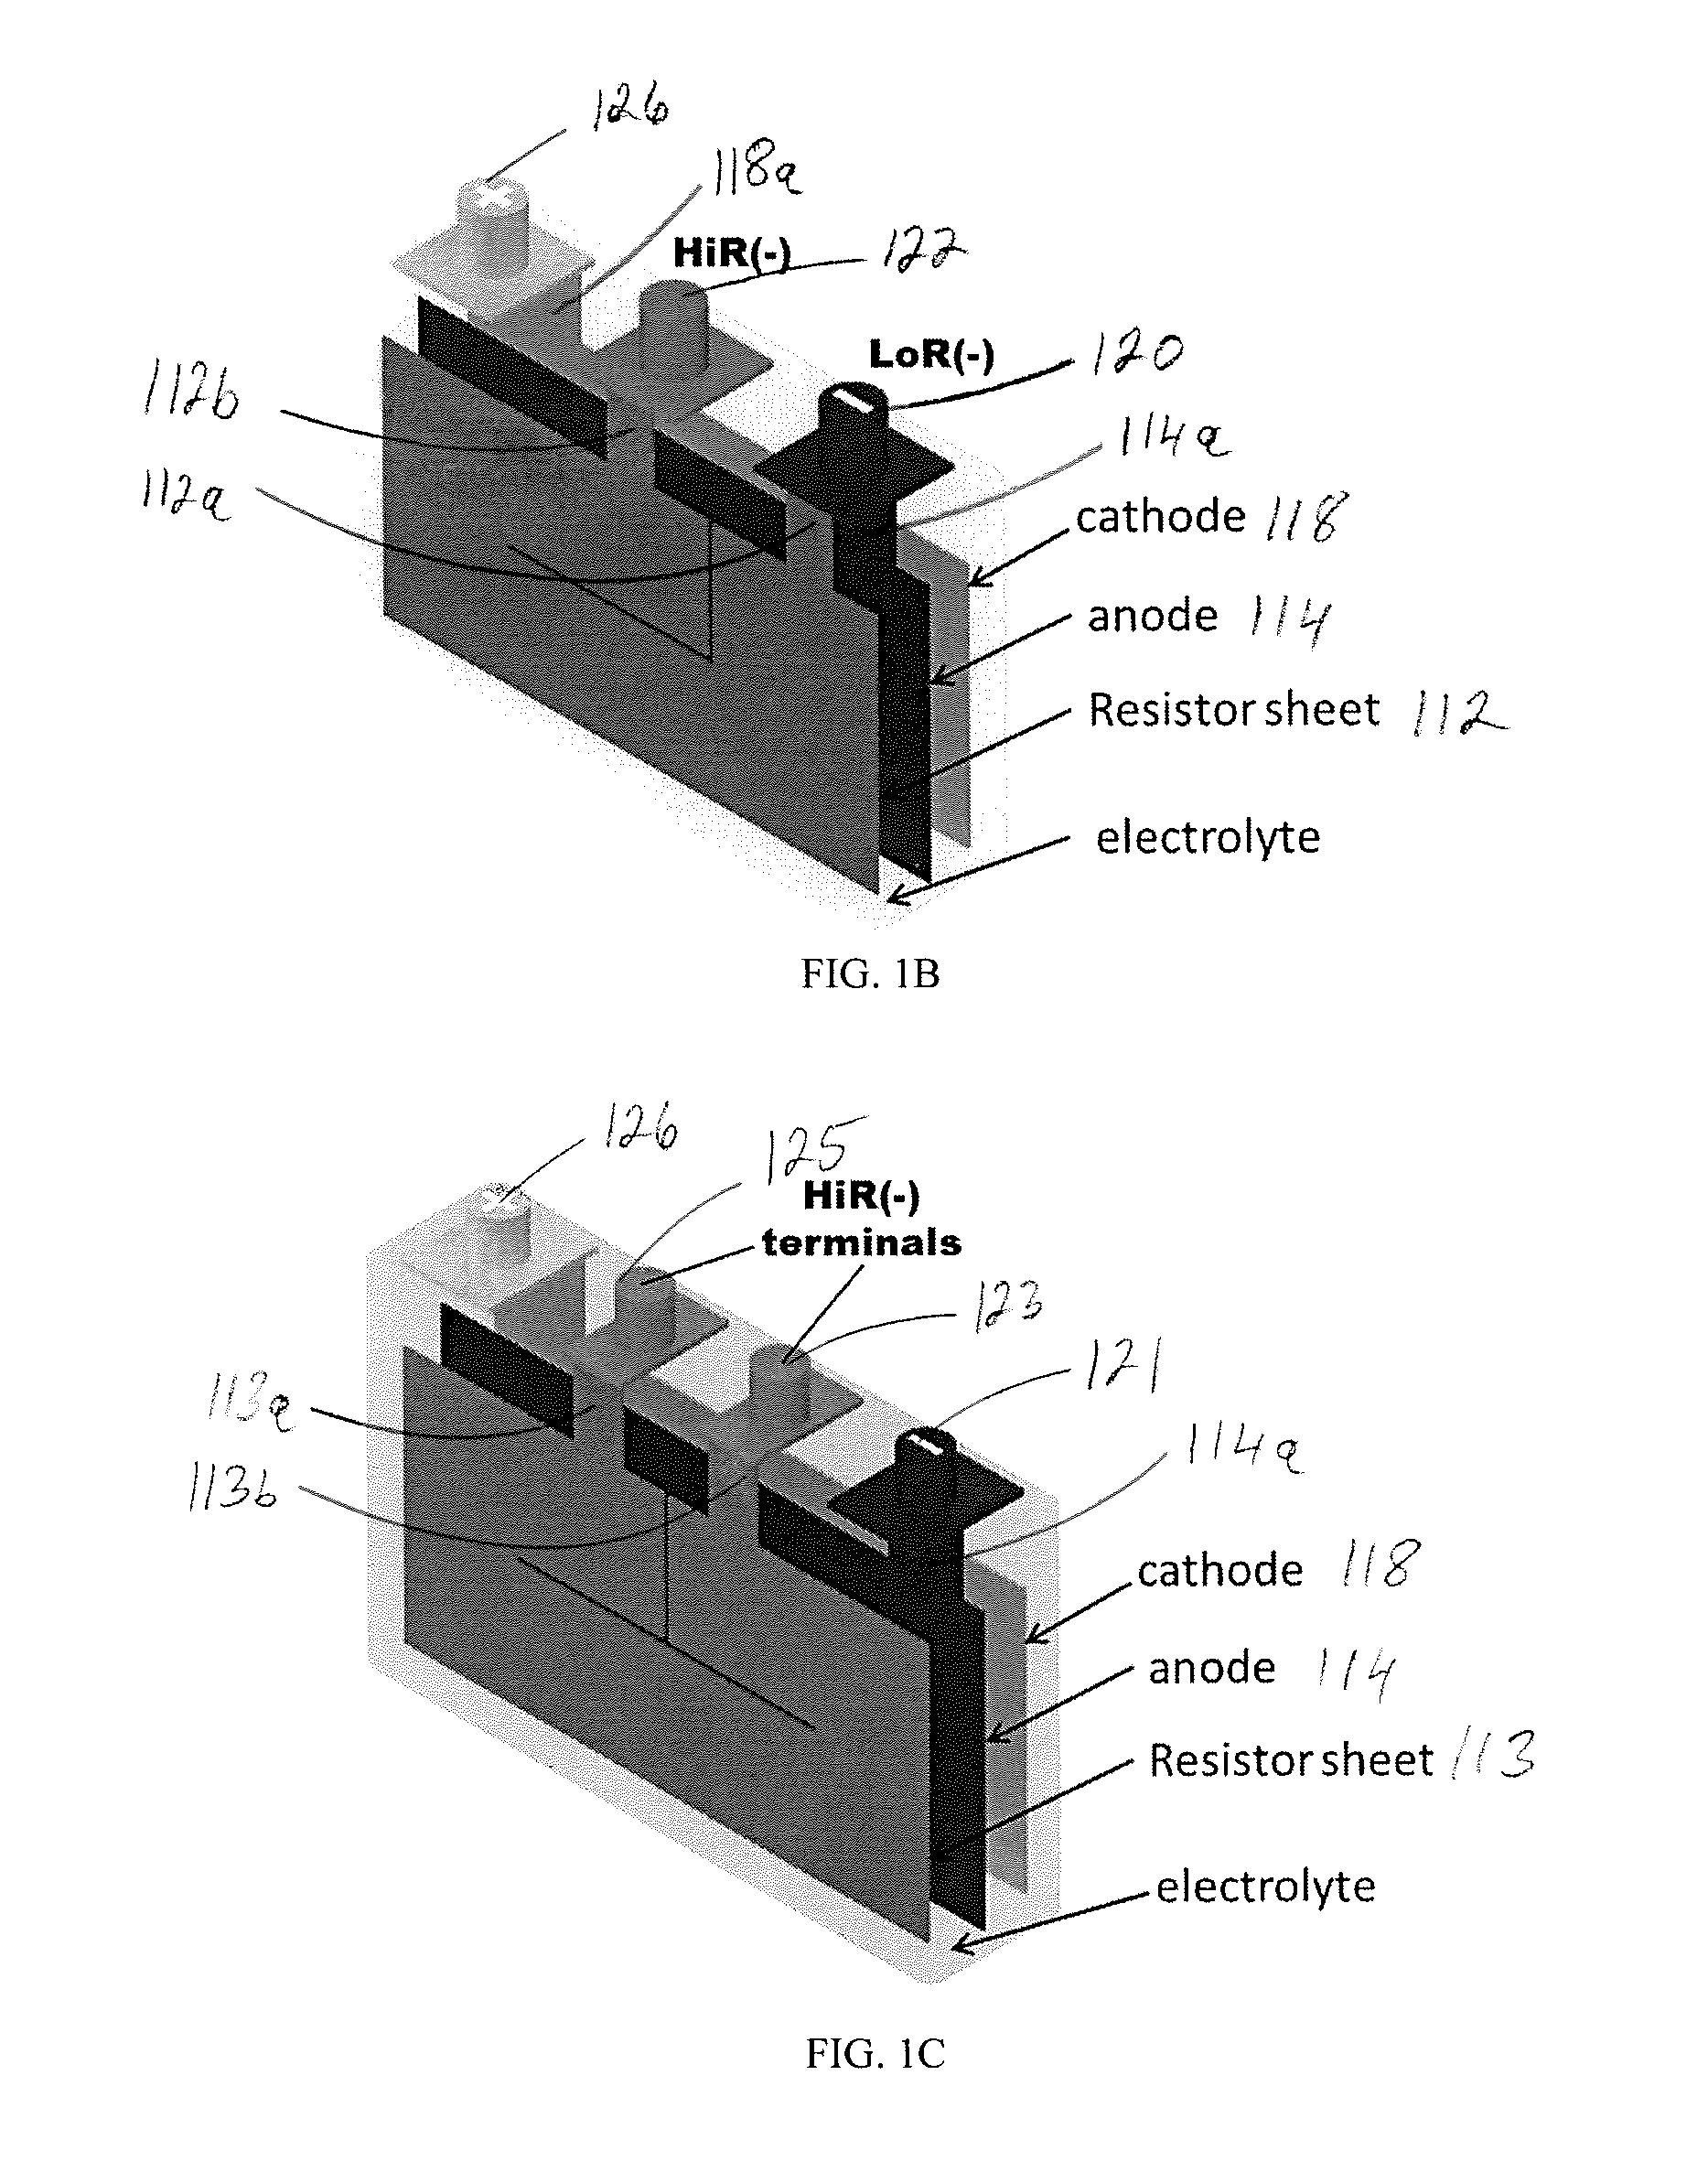 Systems and methods for fast charging batteries at low temperatures